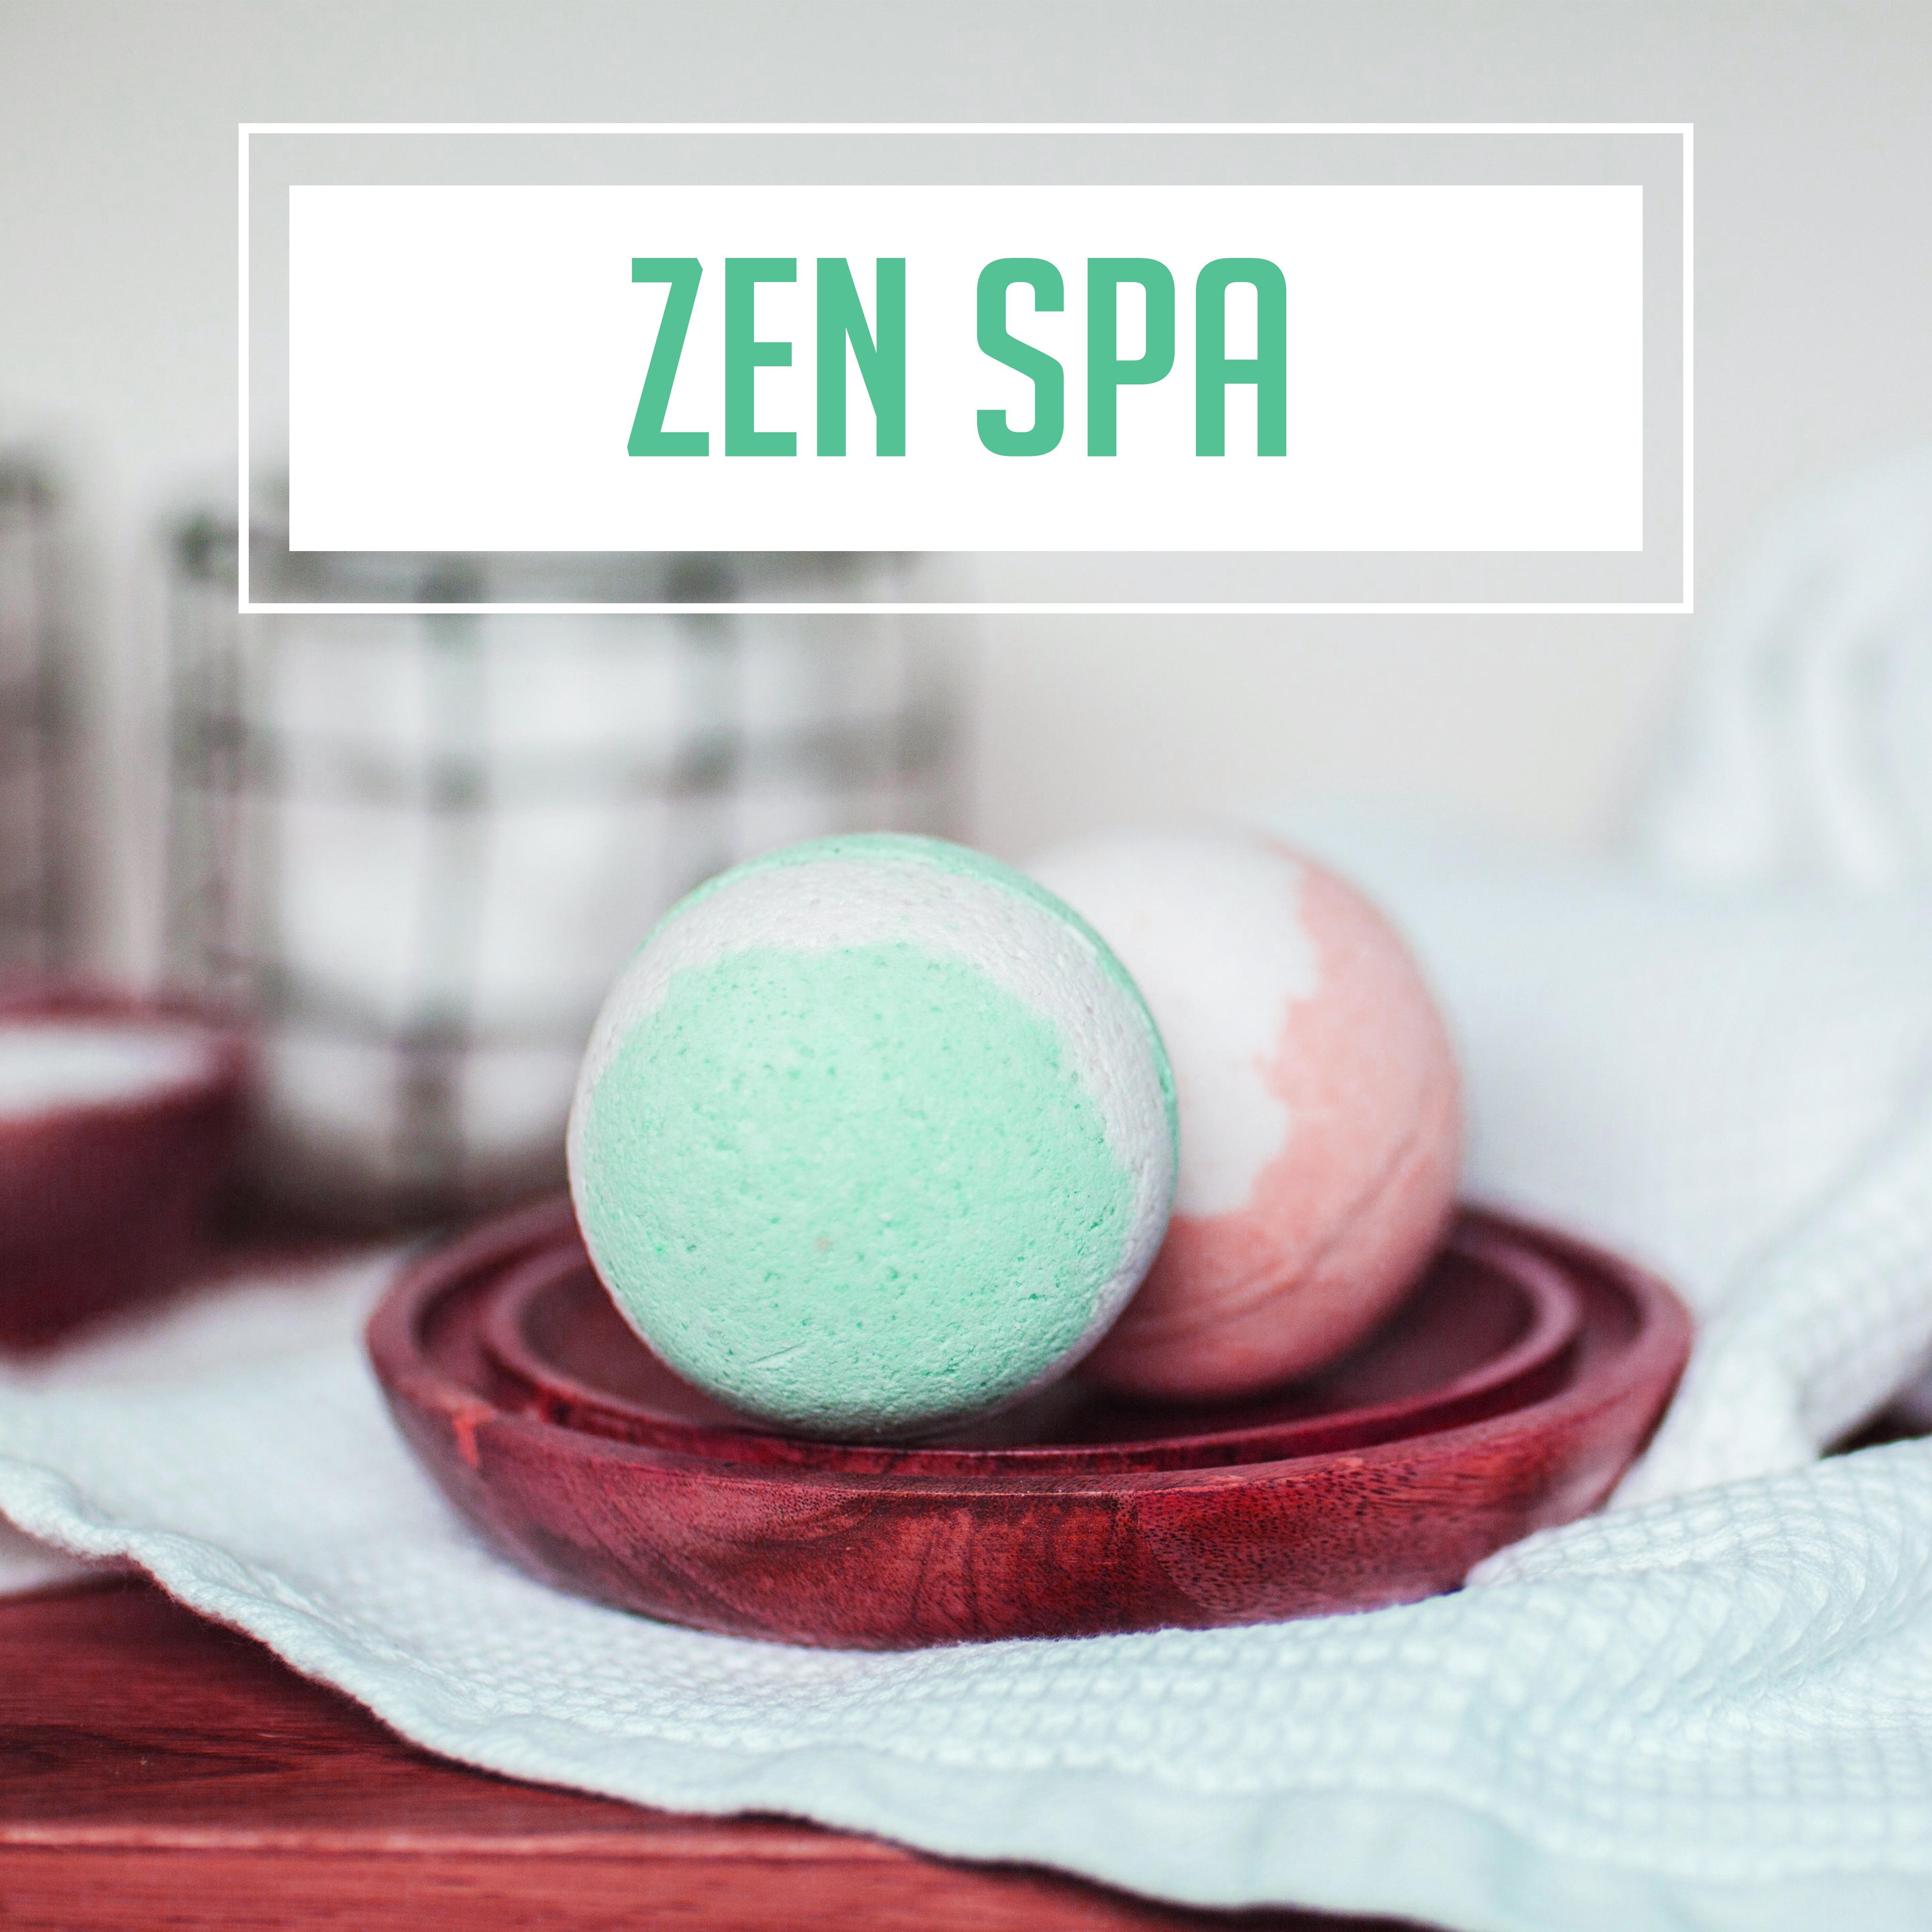 Zen Spa – Soothing Therapy, Anti Stress Sounds, Healing Music for Spa, Harmony, Rest, Meditation